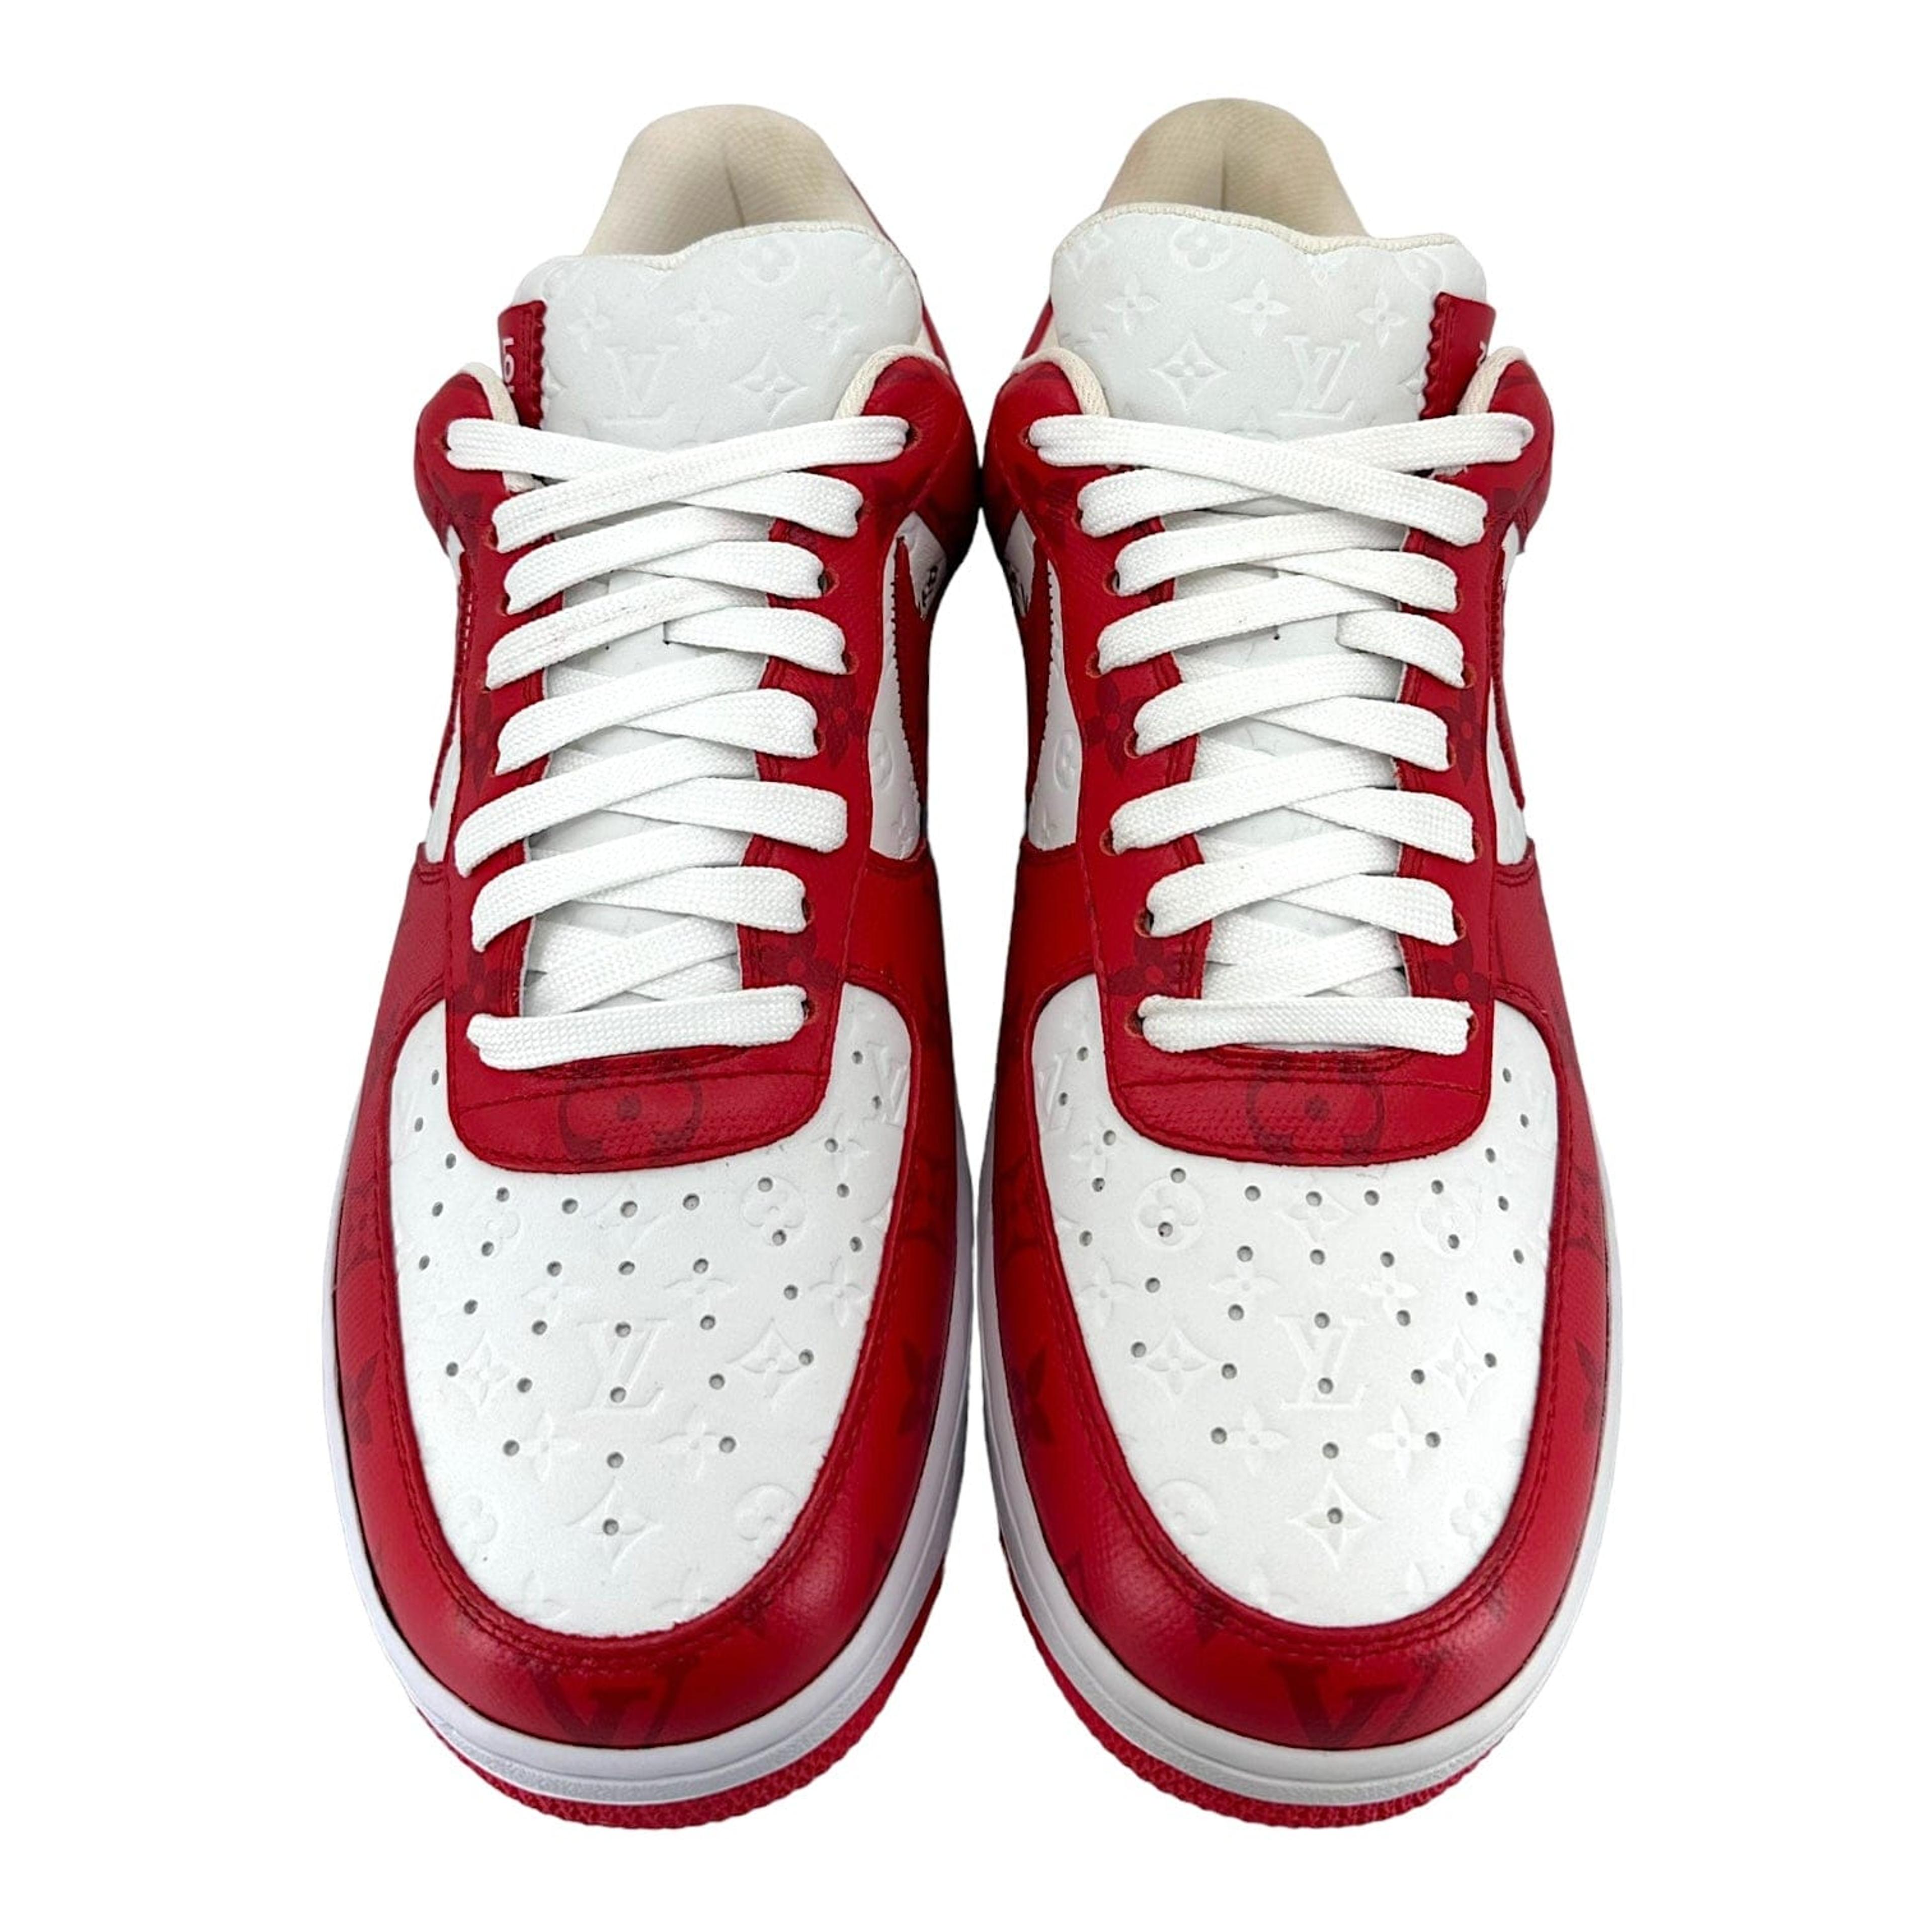 Alternate View 4 of Louis Vuitton x Nike Air Force 1 Low By Virgil Abloh White Red